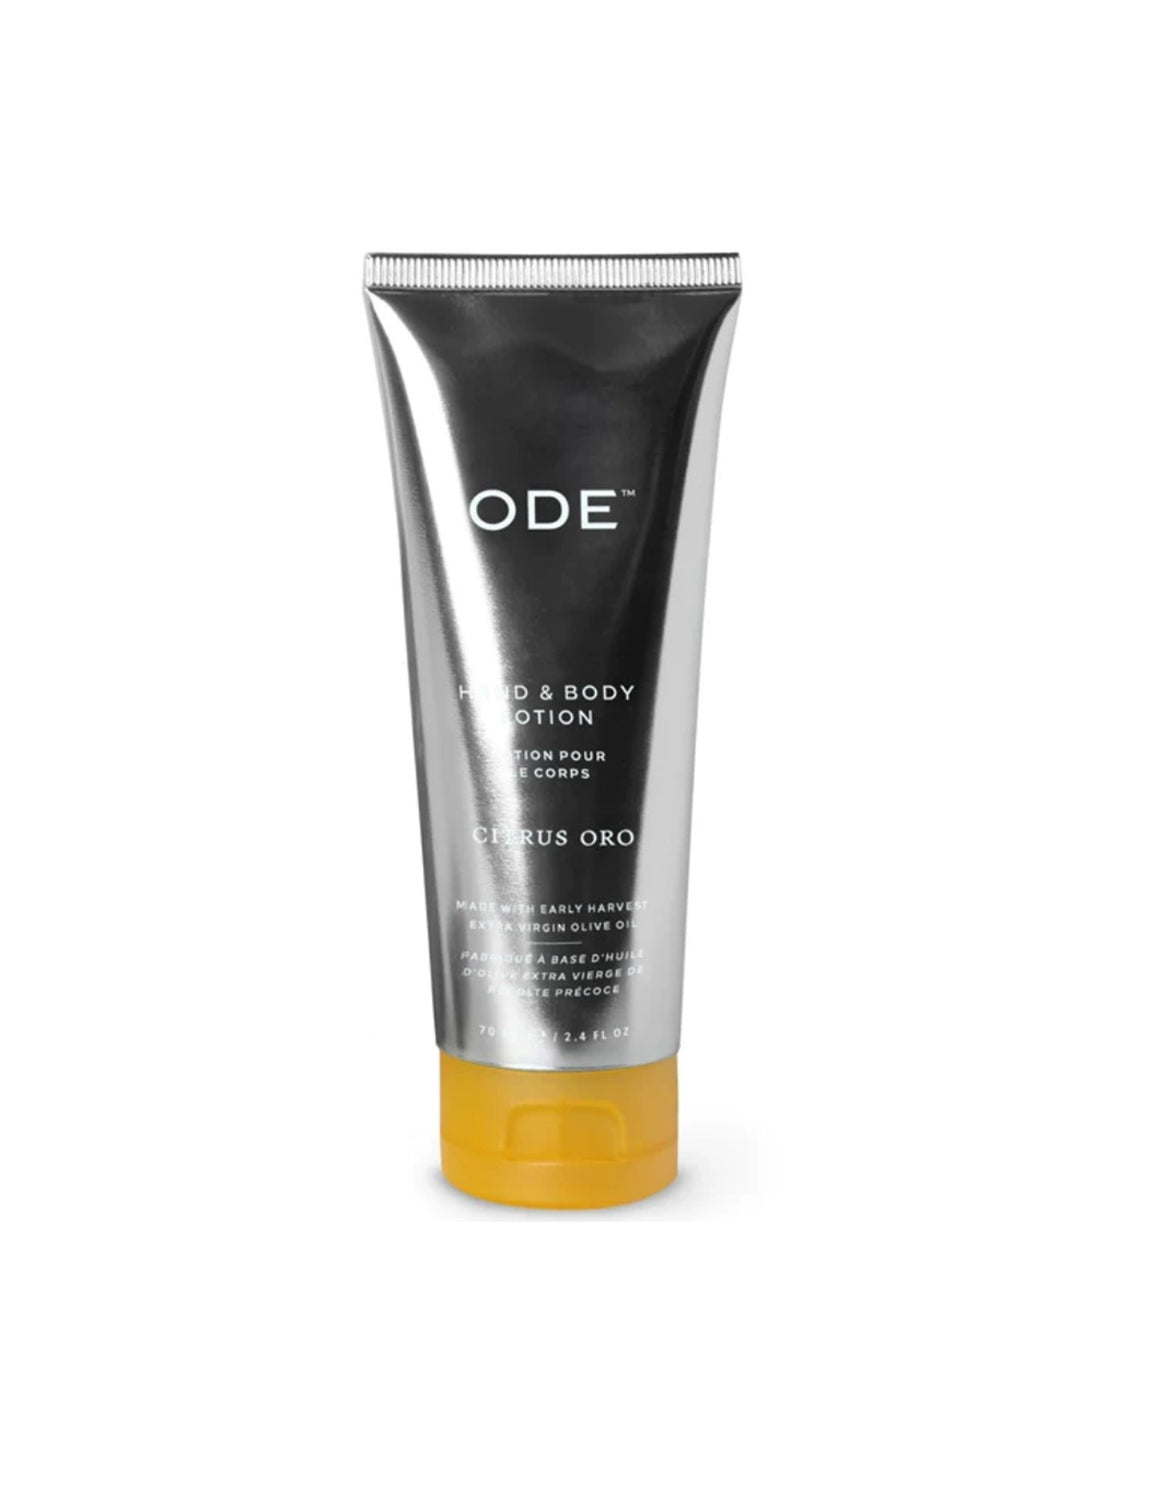 ODE from McEvoy Ranch - Hand and Body Lotion Tube - CITRUS ORO